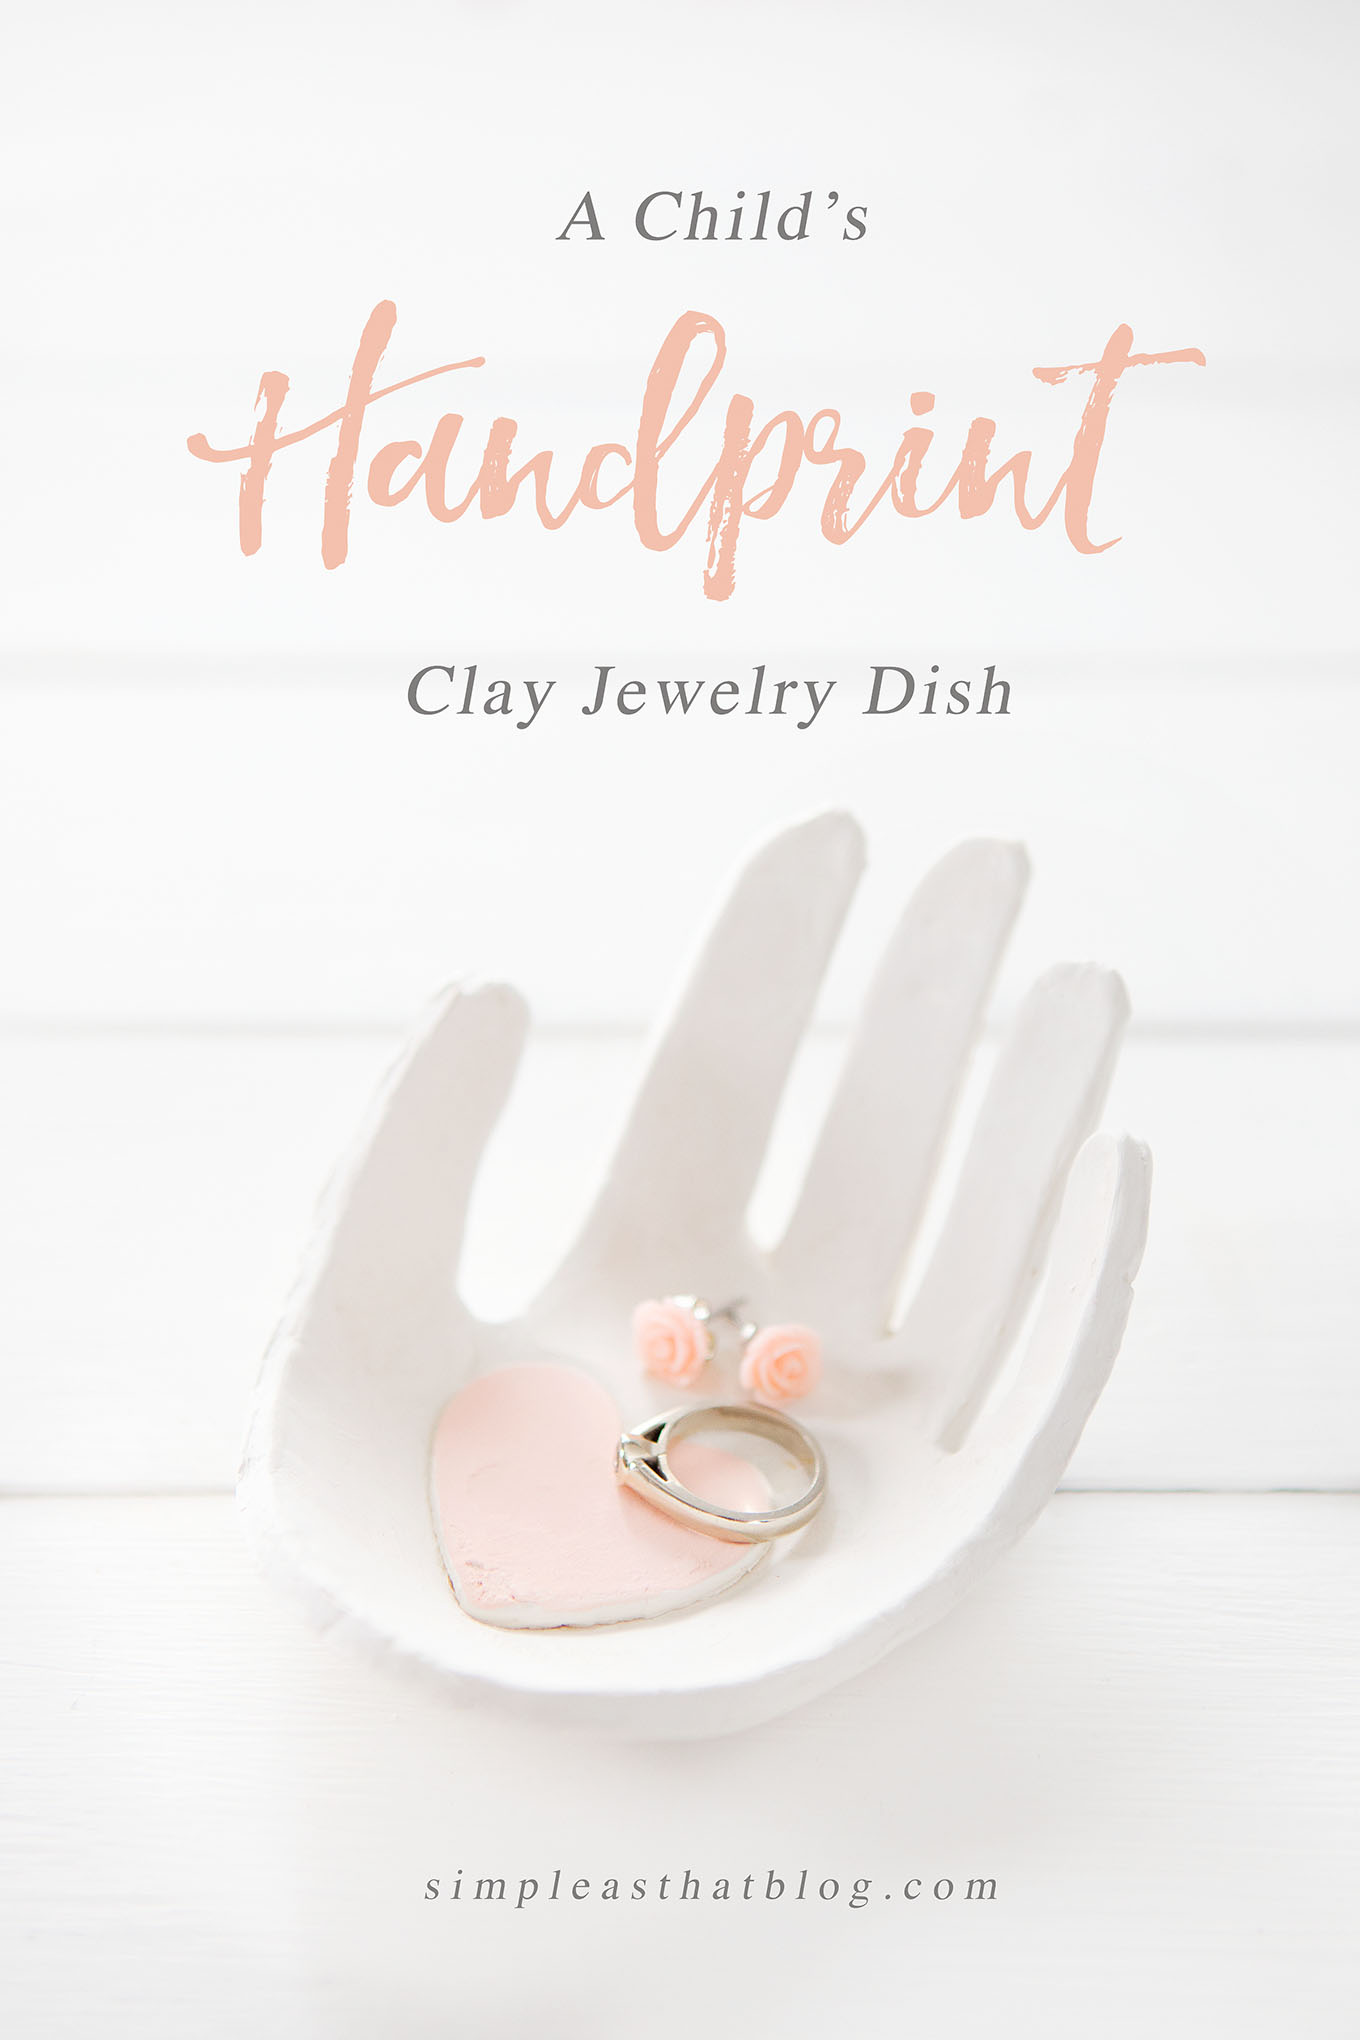 Create a keepsake handprint jewelry dish out of clay using your child's hand – they're easy to make and are a darling gift idea to keep in mind for Mother's Day. These sweet little dishes are guaranteed to melt any Mom or Grandma's heart.